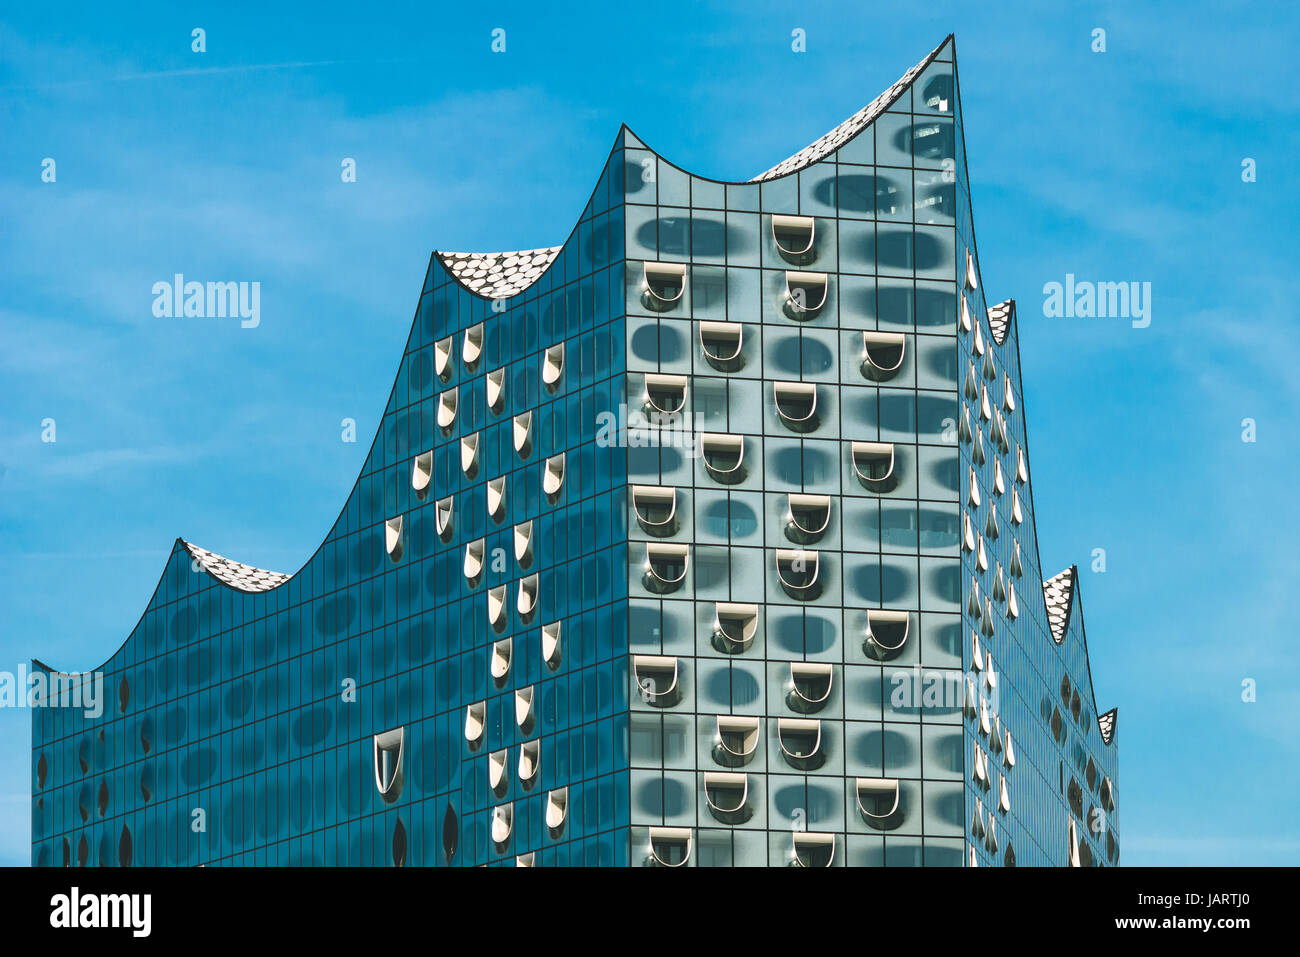 Hamburg, Germany - May 28, 2017: Top shape of Elbphilharmonie with white windows and some white clouds in sky, Hamburg, Germany. Stock Photo